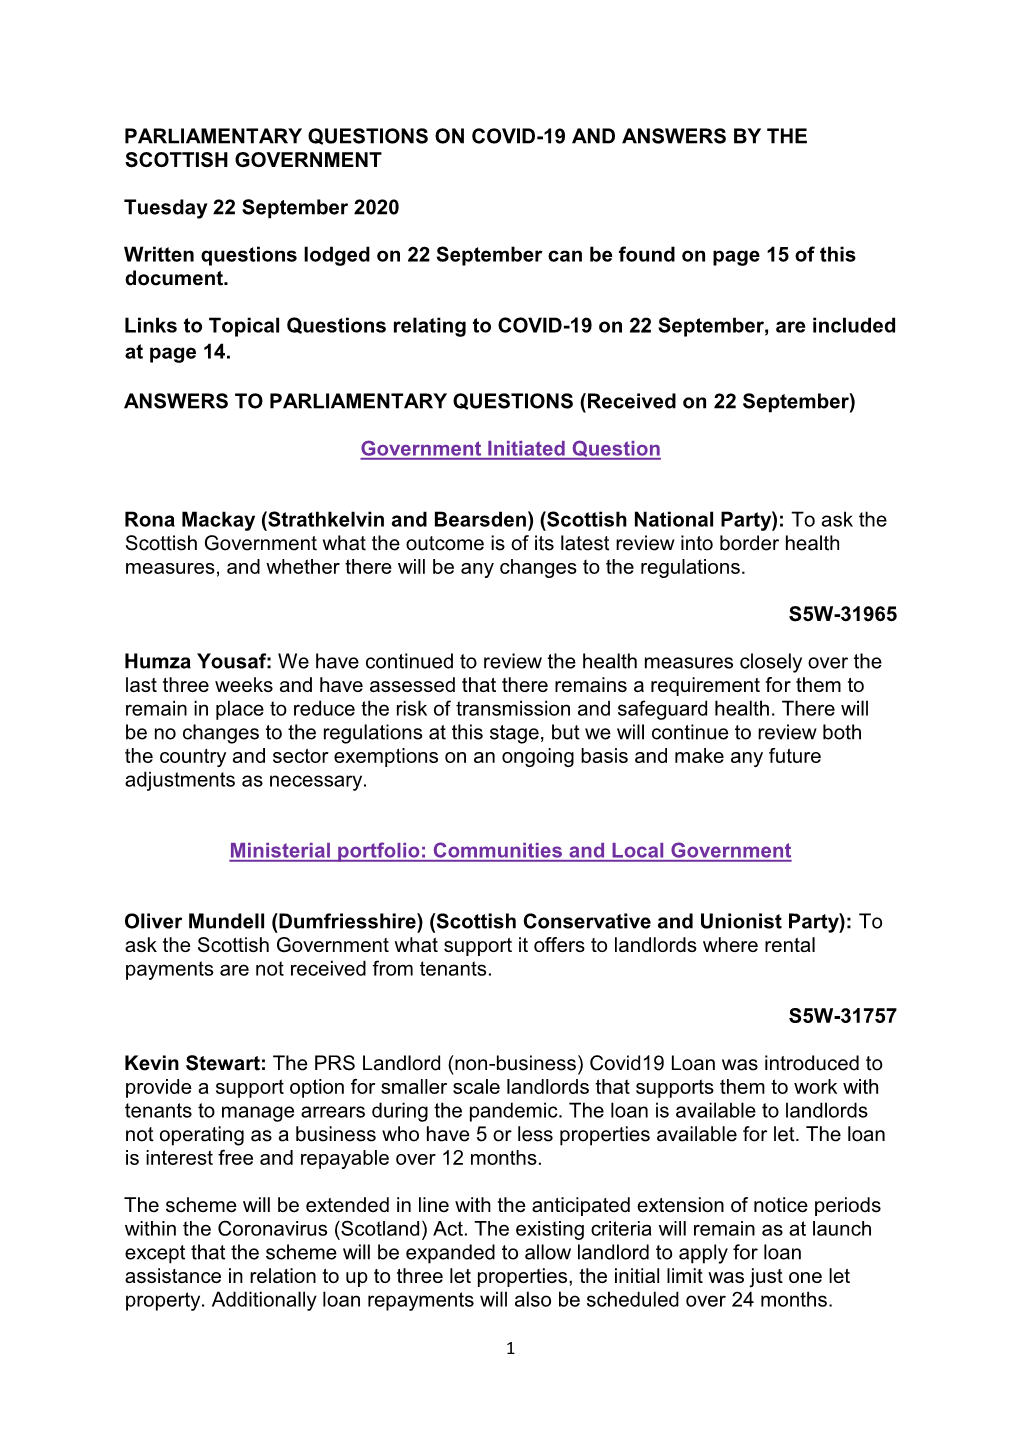 PARLIAMENTARY QUESTIONS on COVID-19 and ANSWERS by the SCOTTISH GOVERNMENT Tuesday 22 September 2020 Written Questions Lodged On